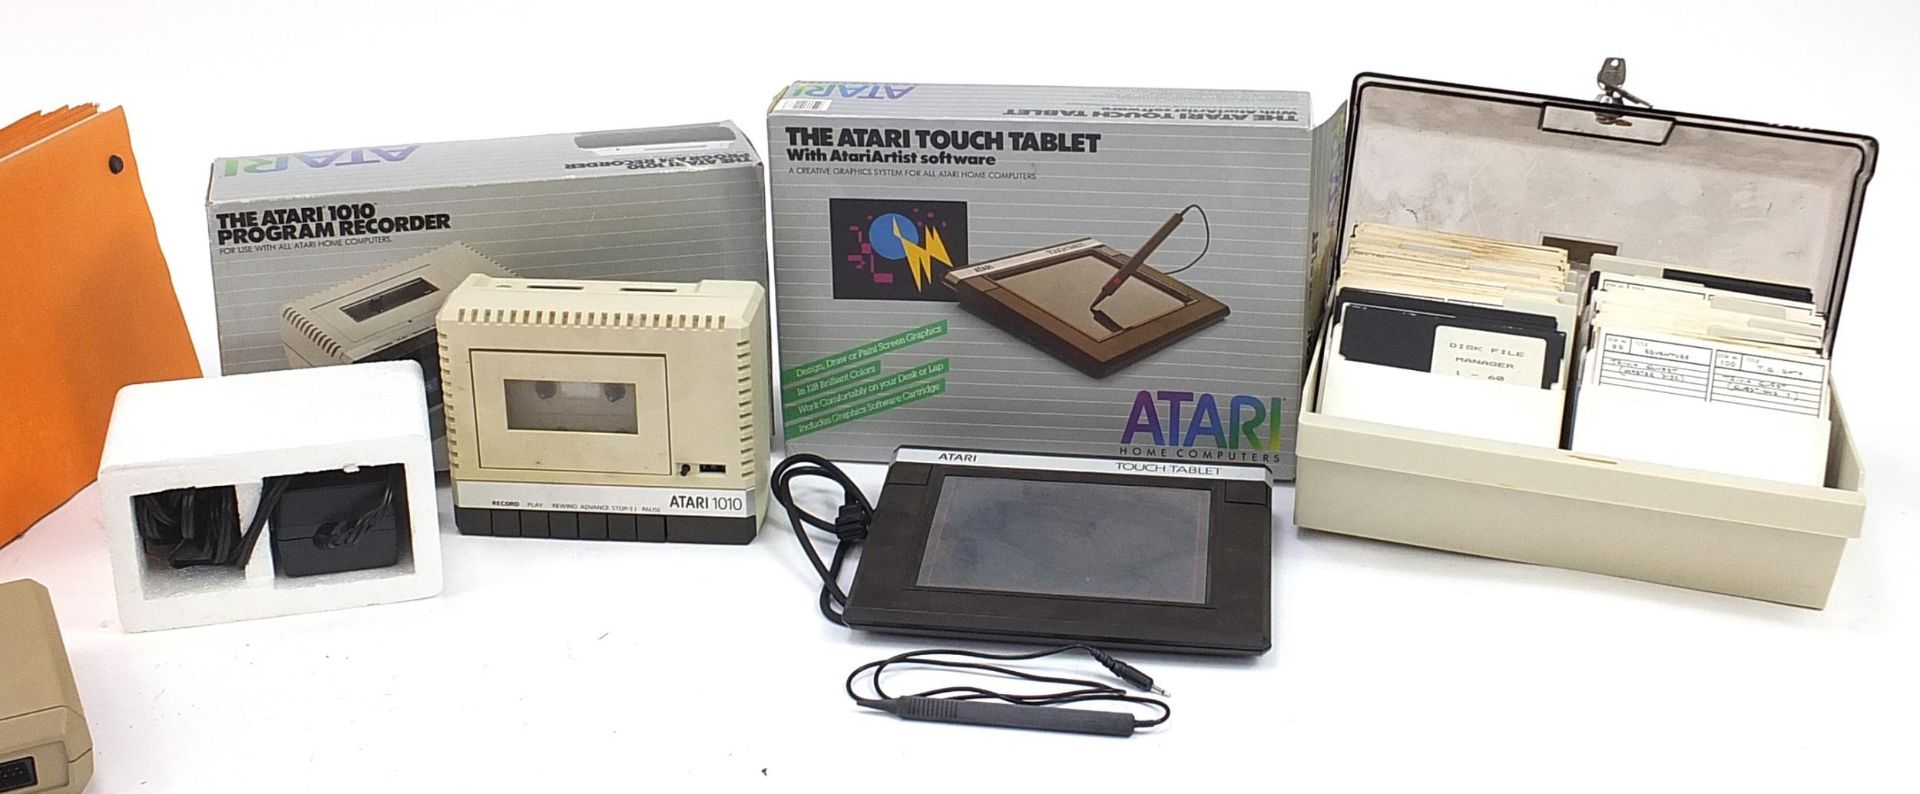 Atari computer accessories, discs and manuals including 1010 programme recorder and touch tablet - Image 3 of 3